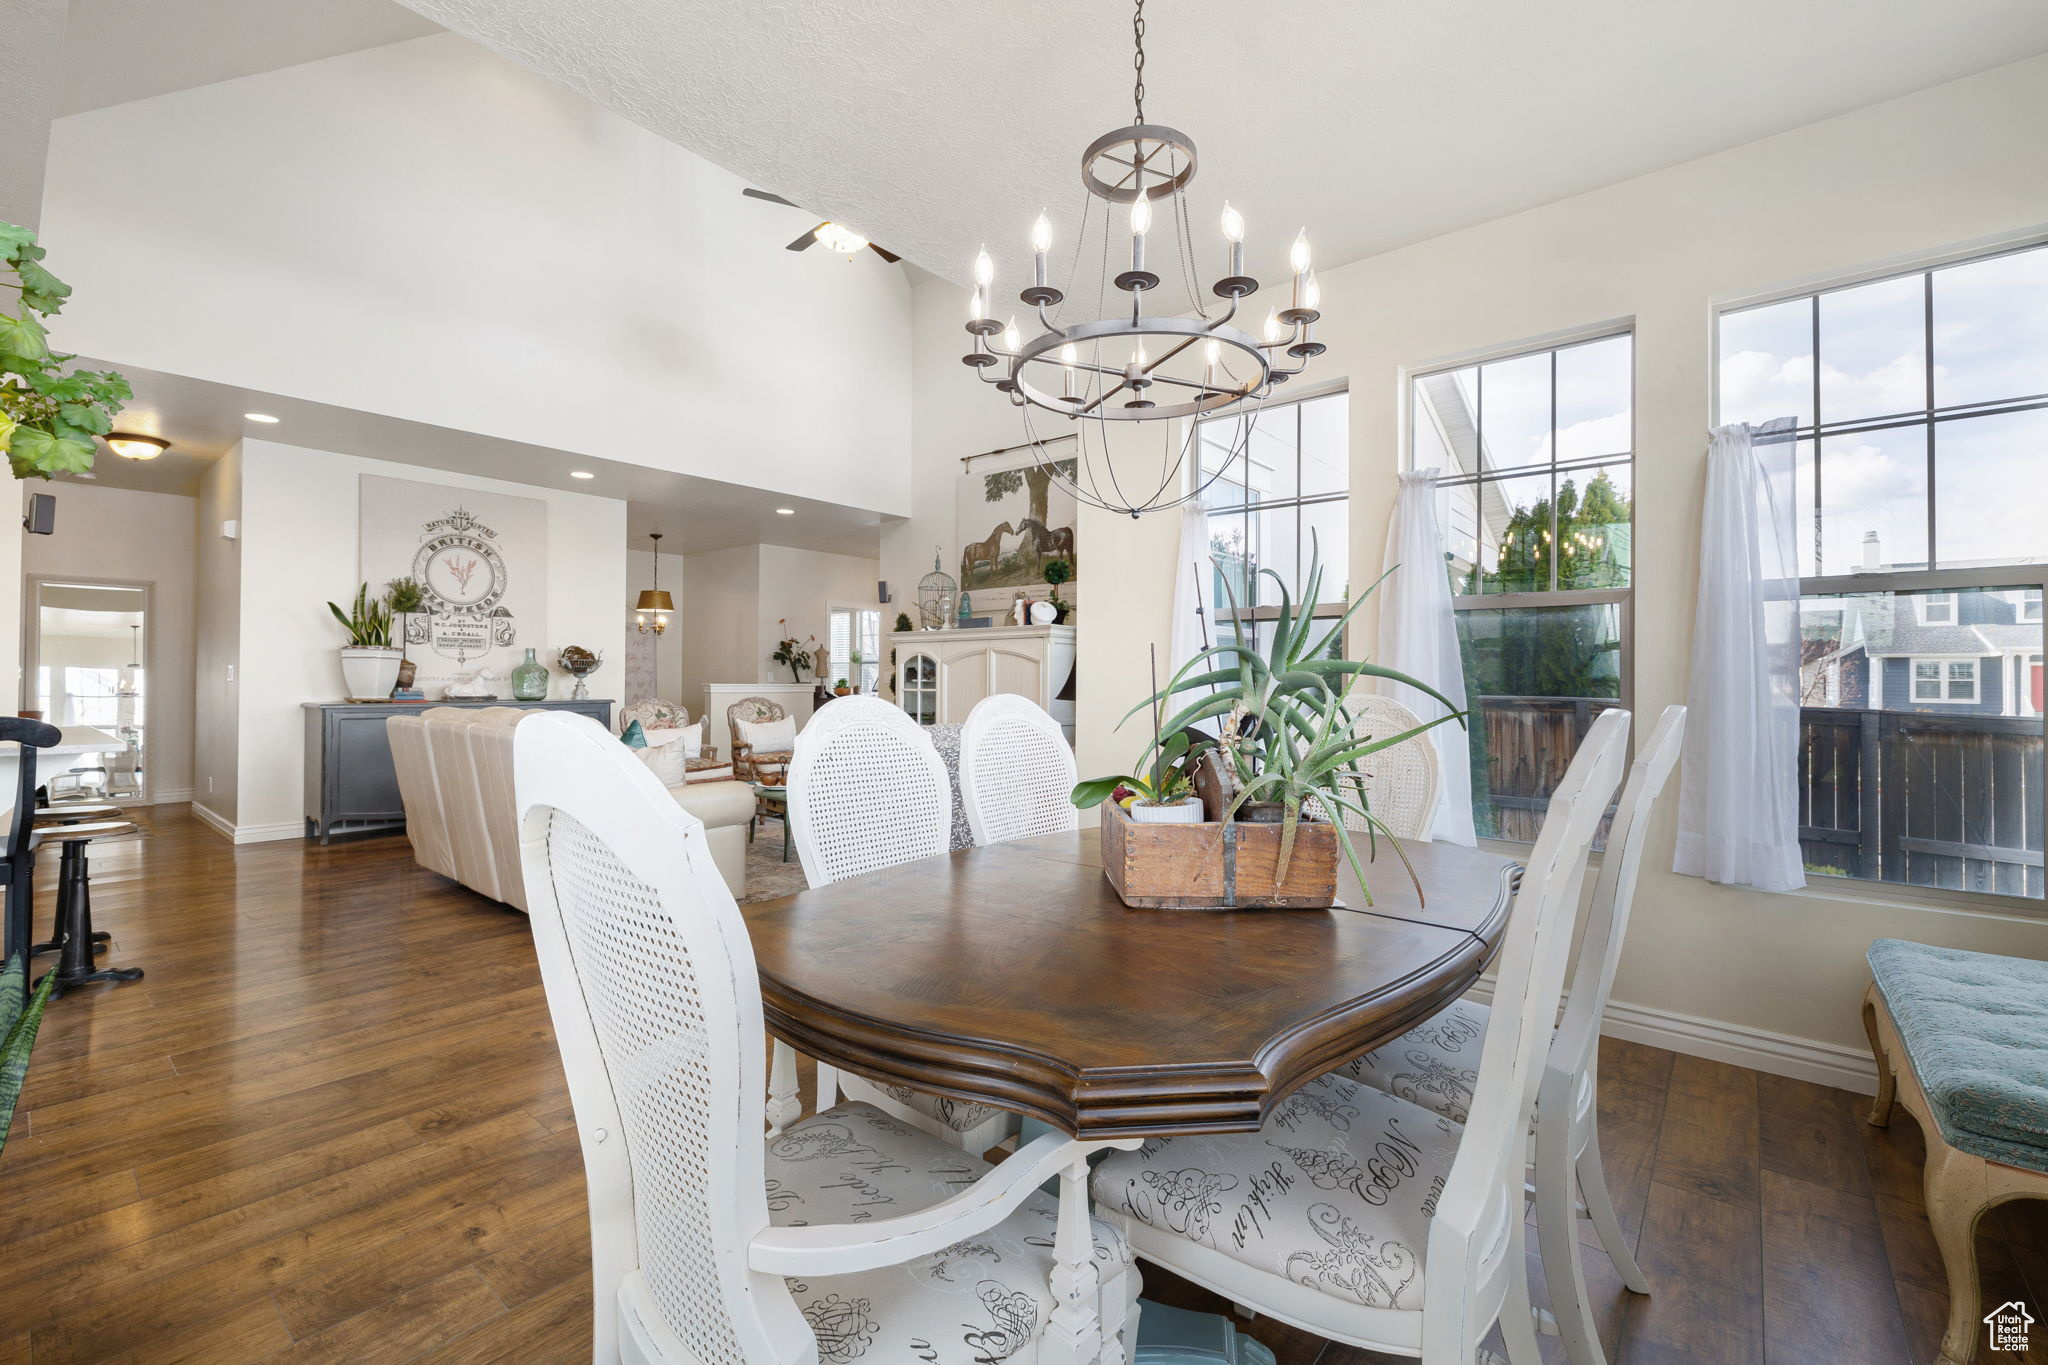 Dining area with a wealth of natural light, a notable chandelier, and dark hardwood / wood-style flooring